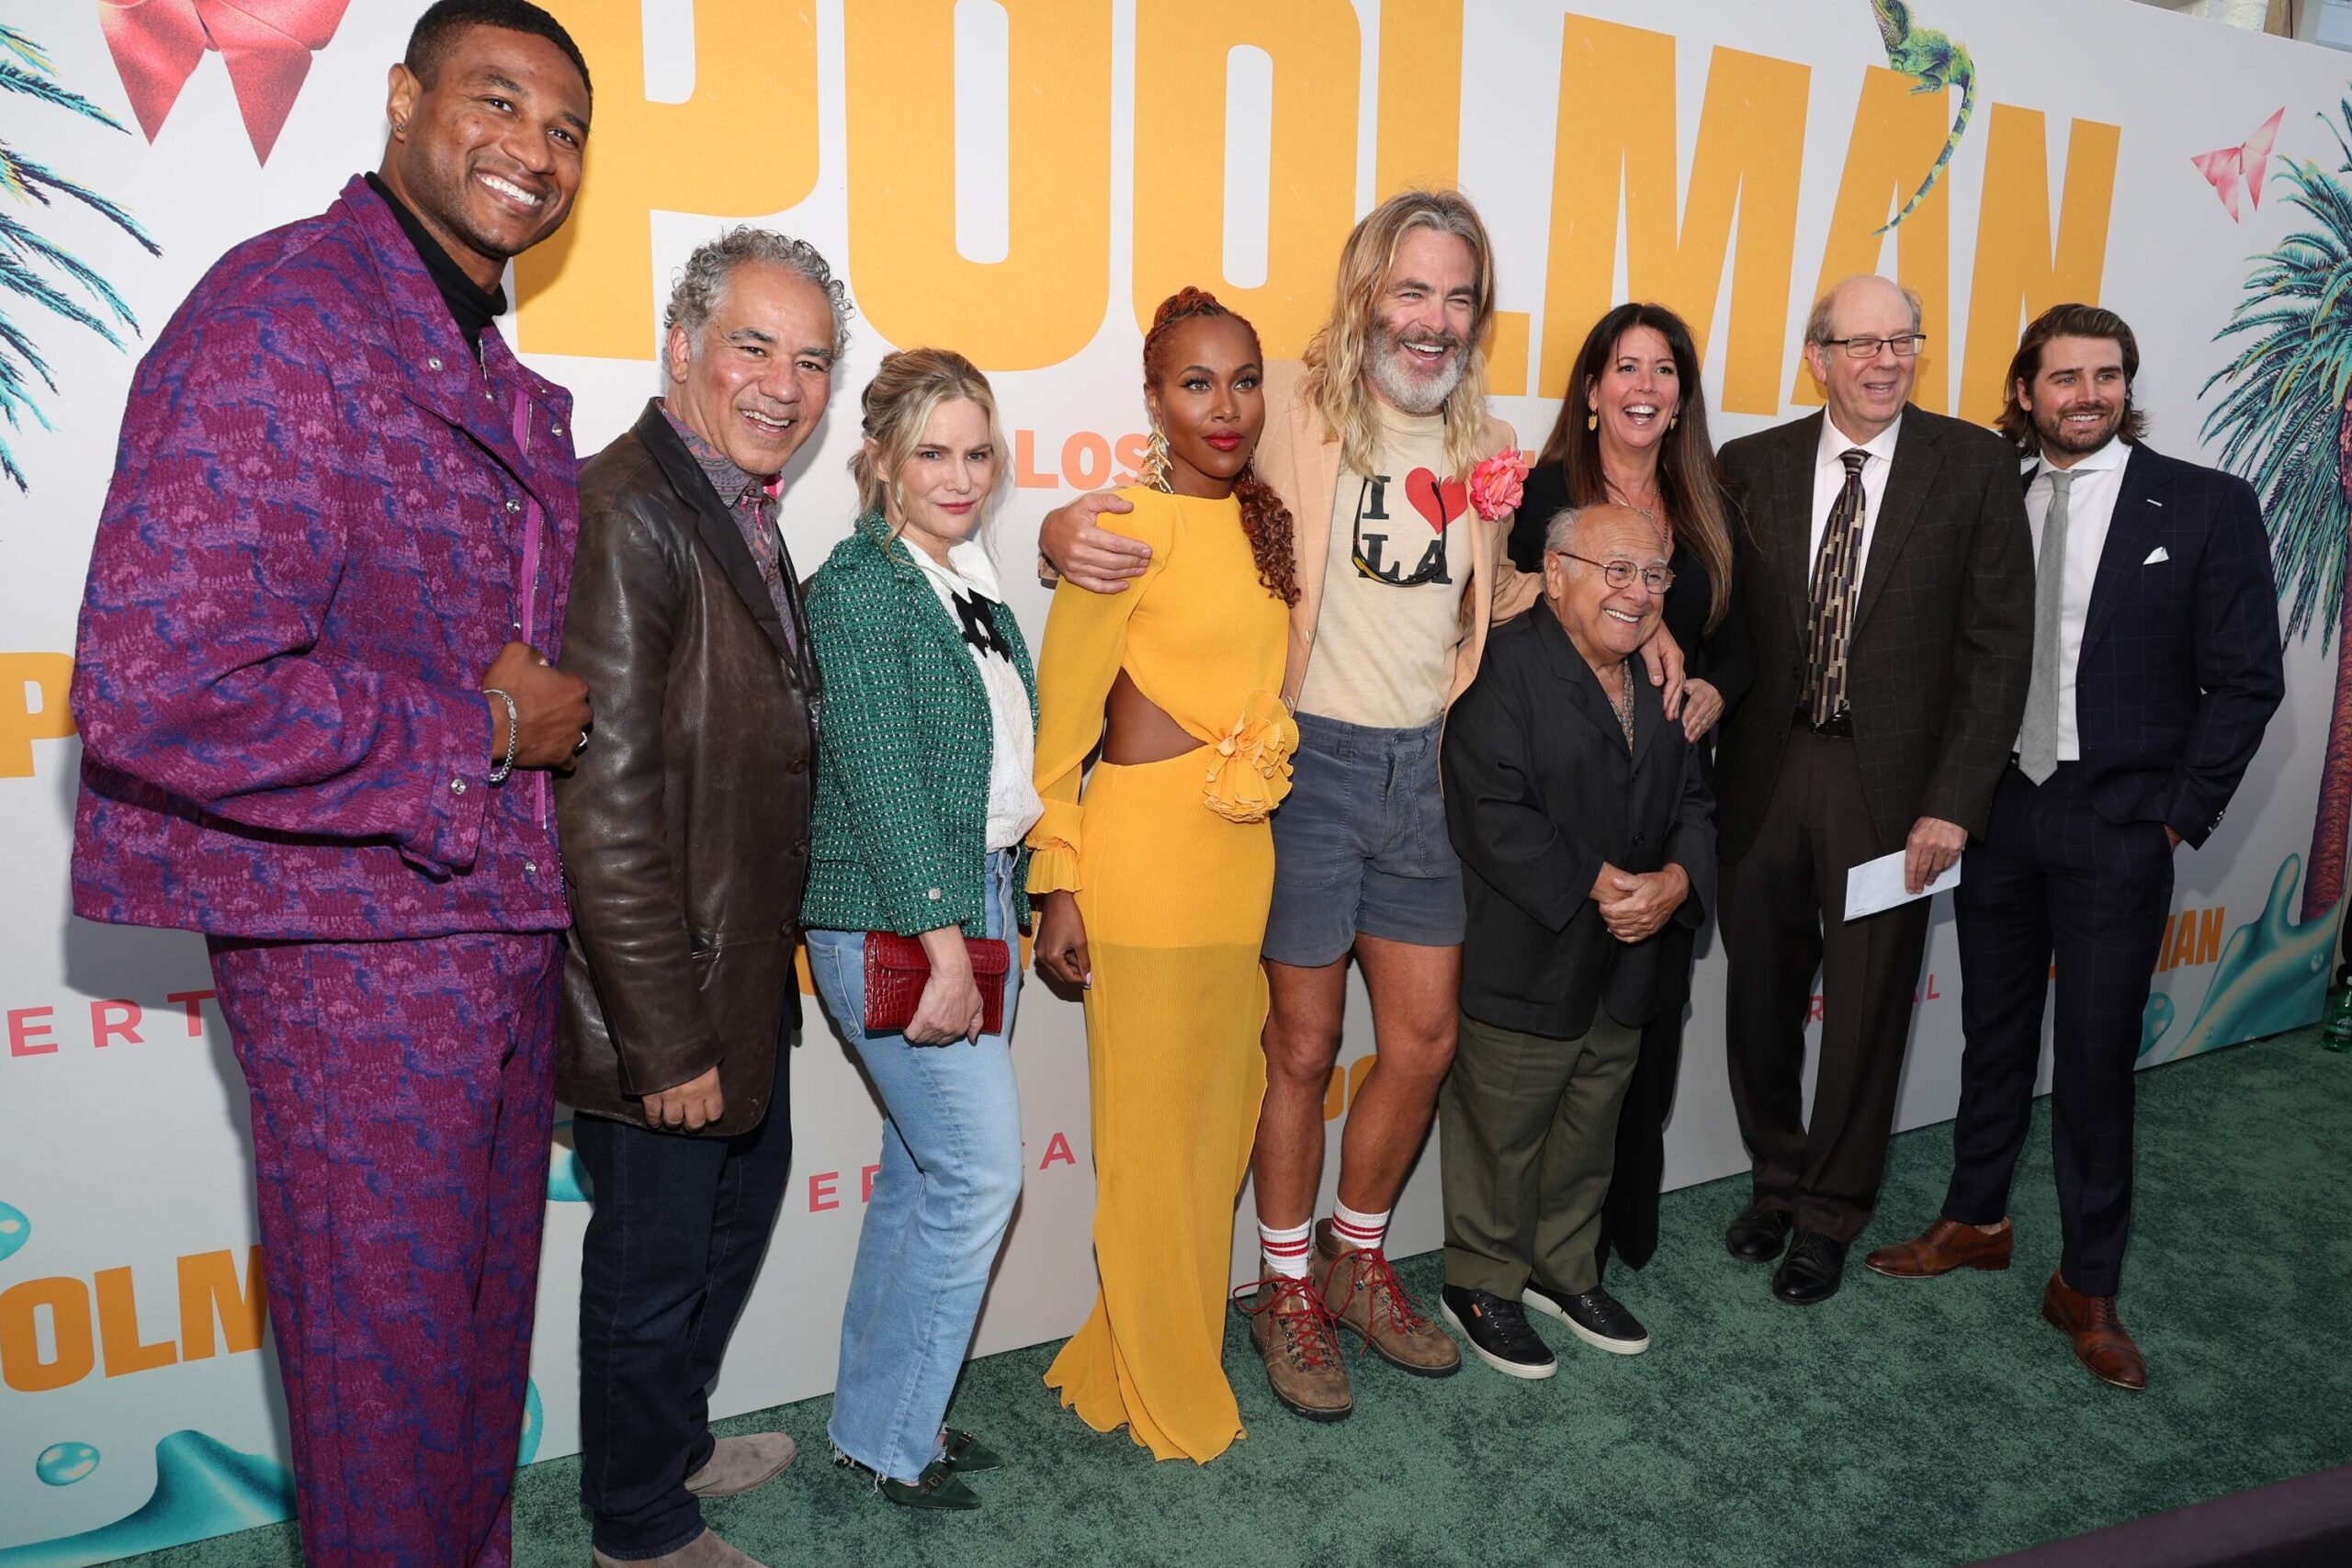 The cast of 'Poolman' poses for a photo on the red carpet at the movie premiere in LA